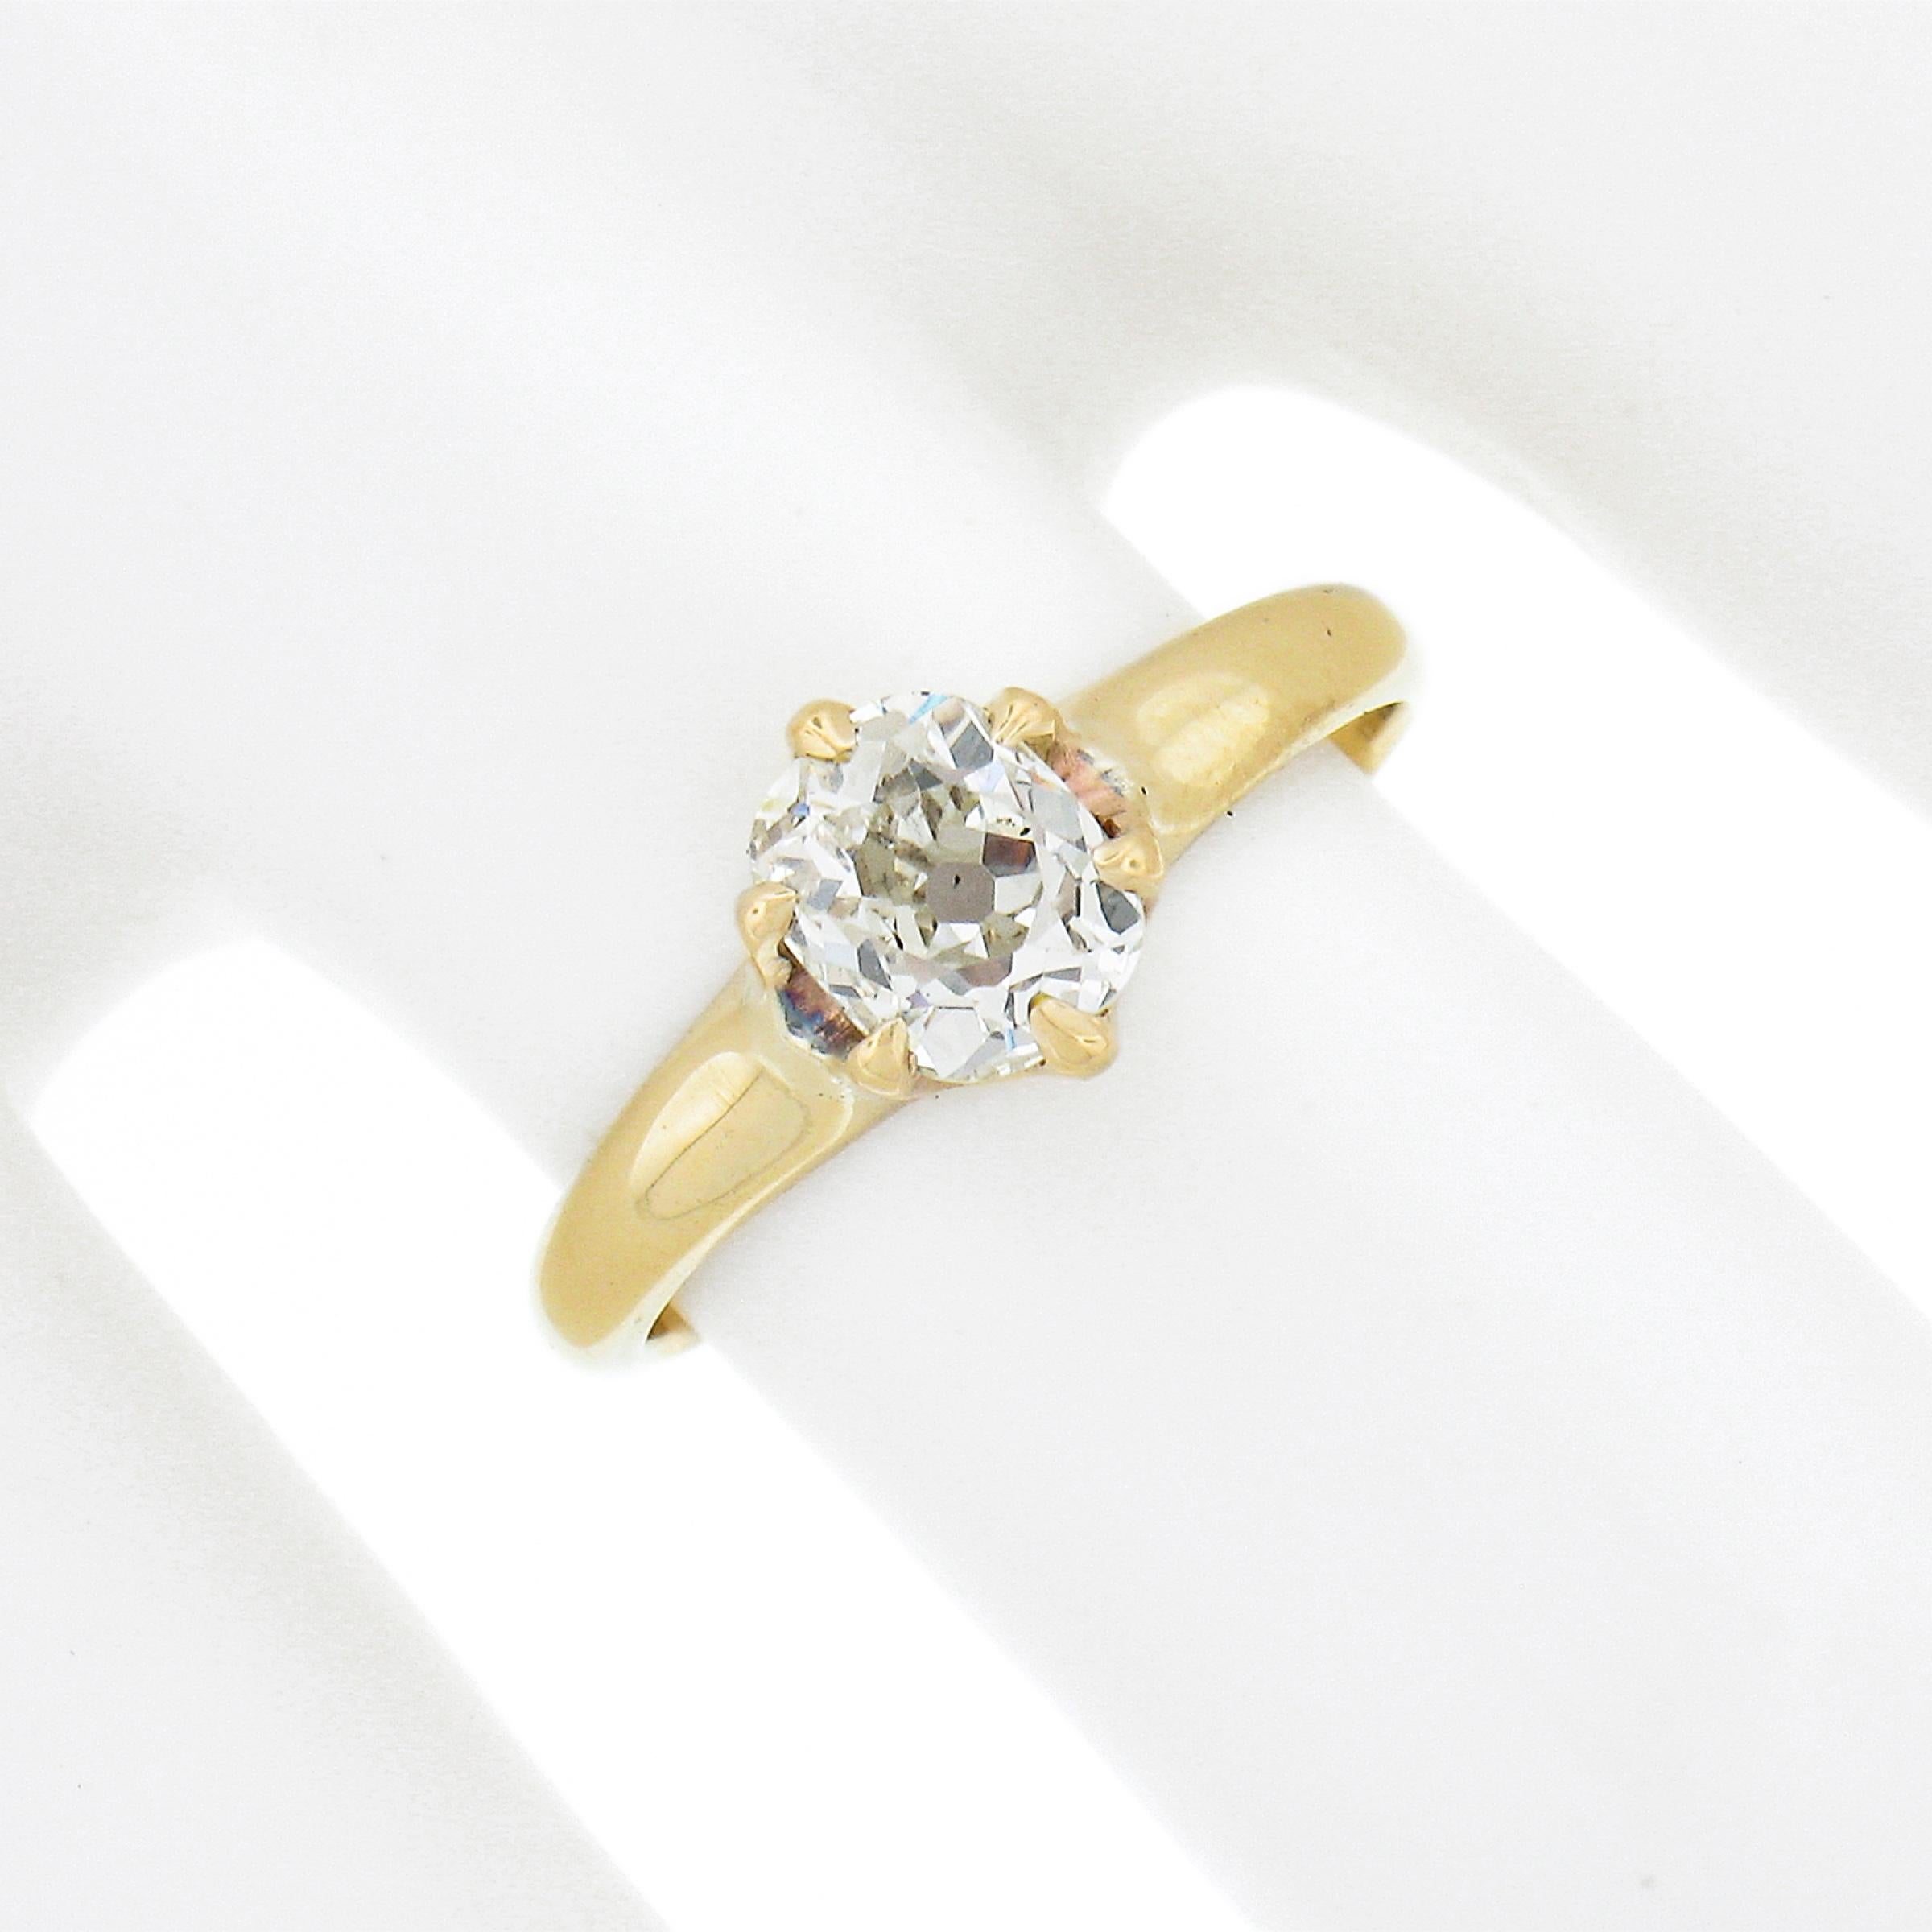 Antique Victorian 14k Gold 0.82ct Old Cushion Diamond Solitaire Engagement Ring In Good Condition For Sale In Montclair, NJ